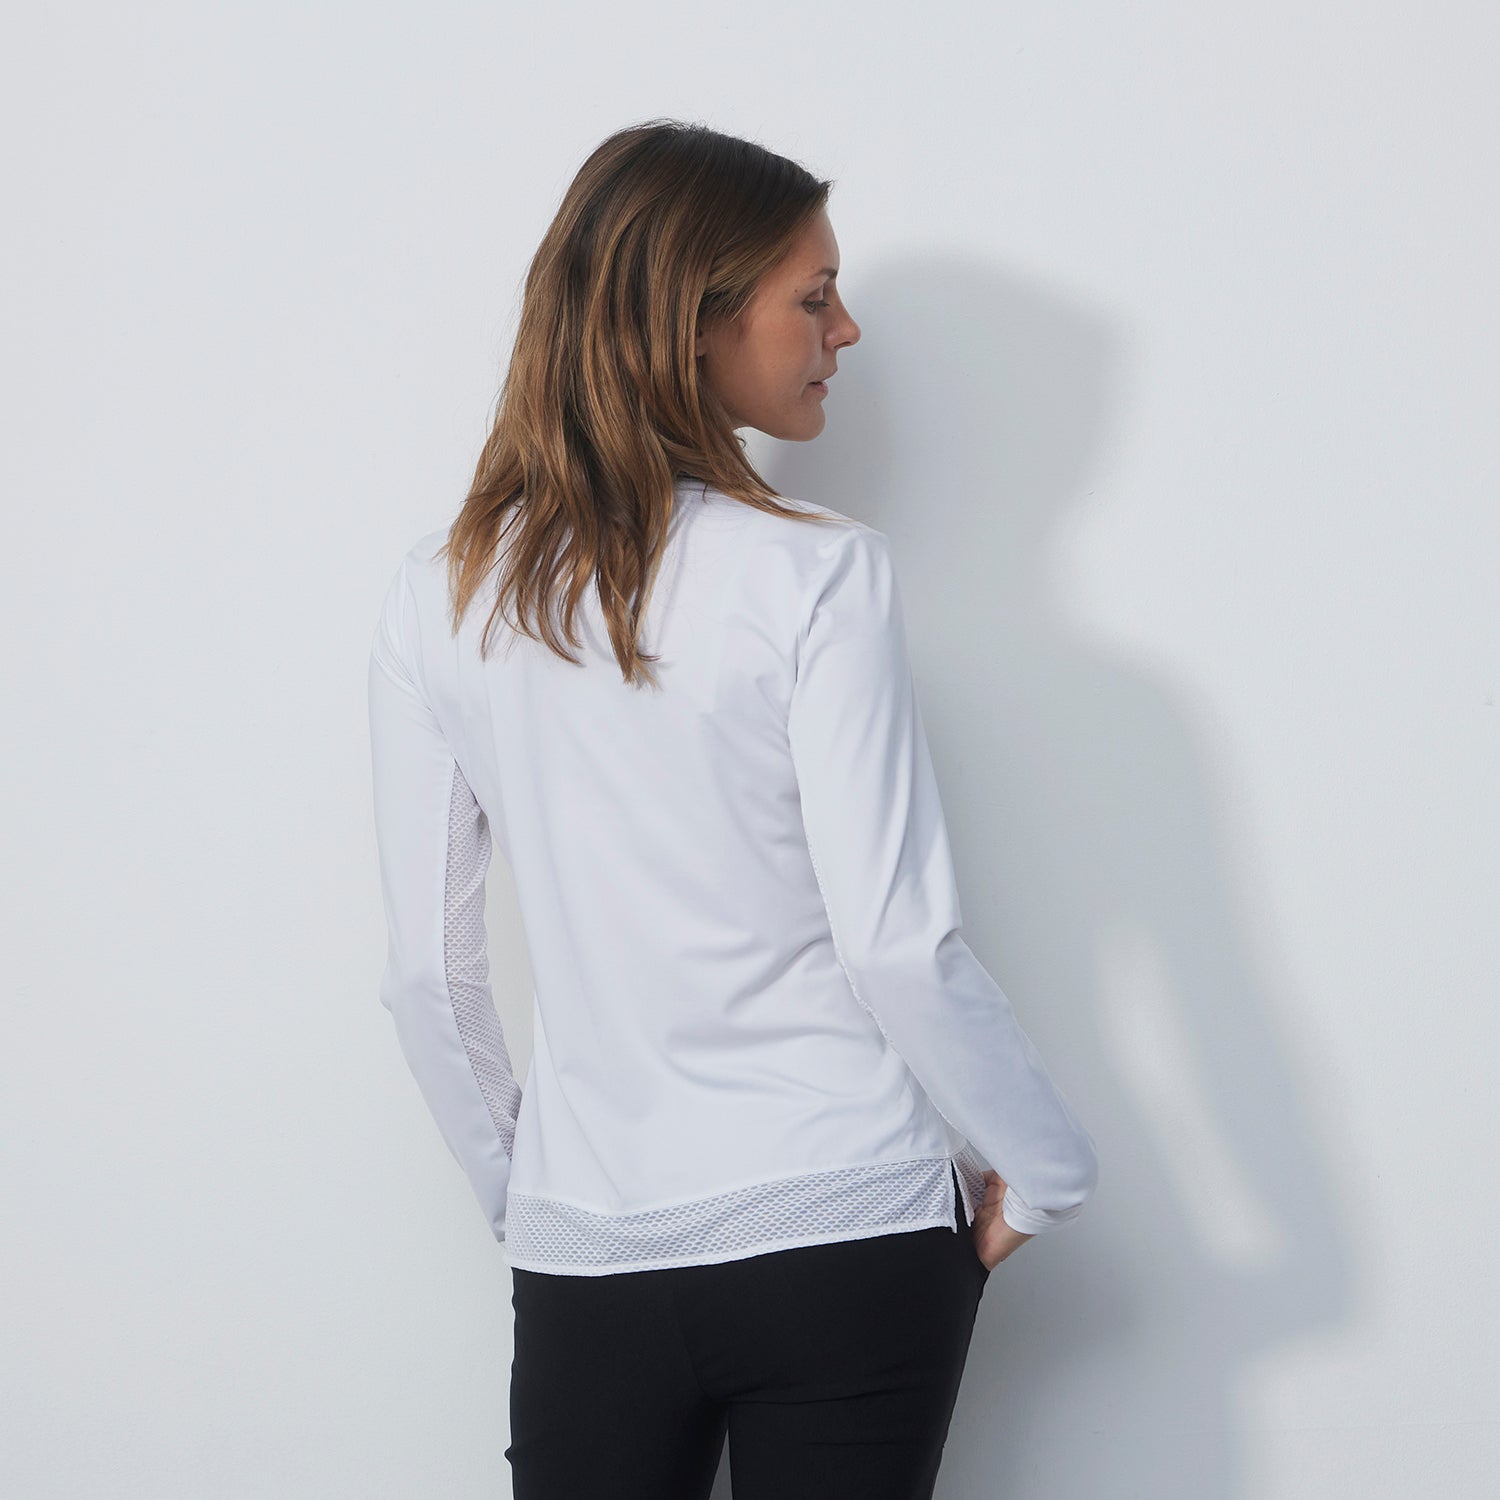 Daily Sports Ladies Long Sleeve Golf Polo Shirt in White